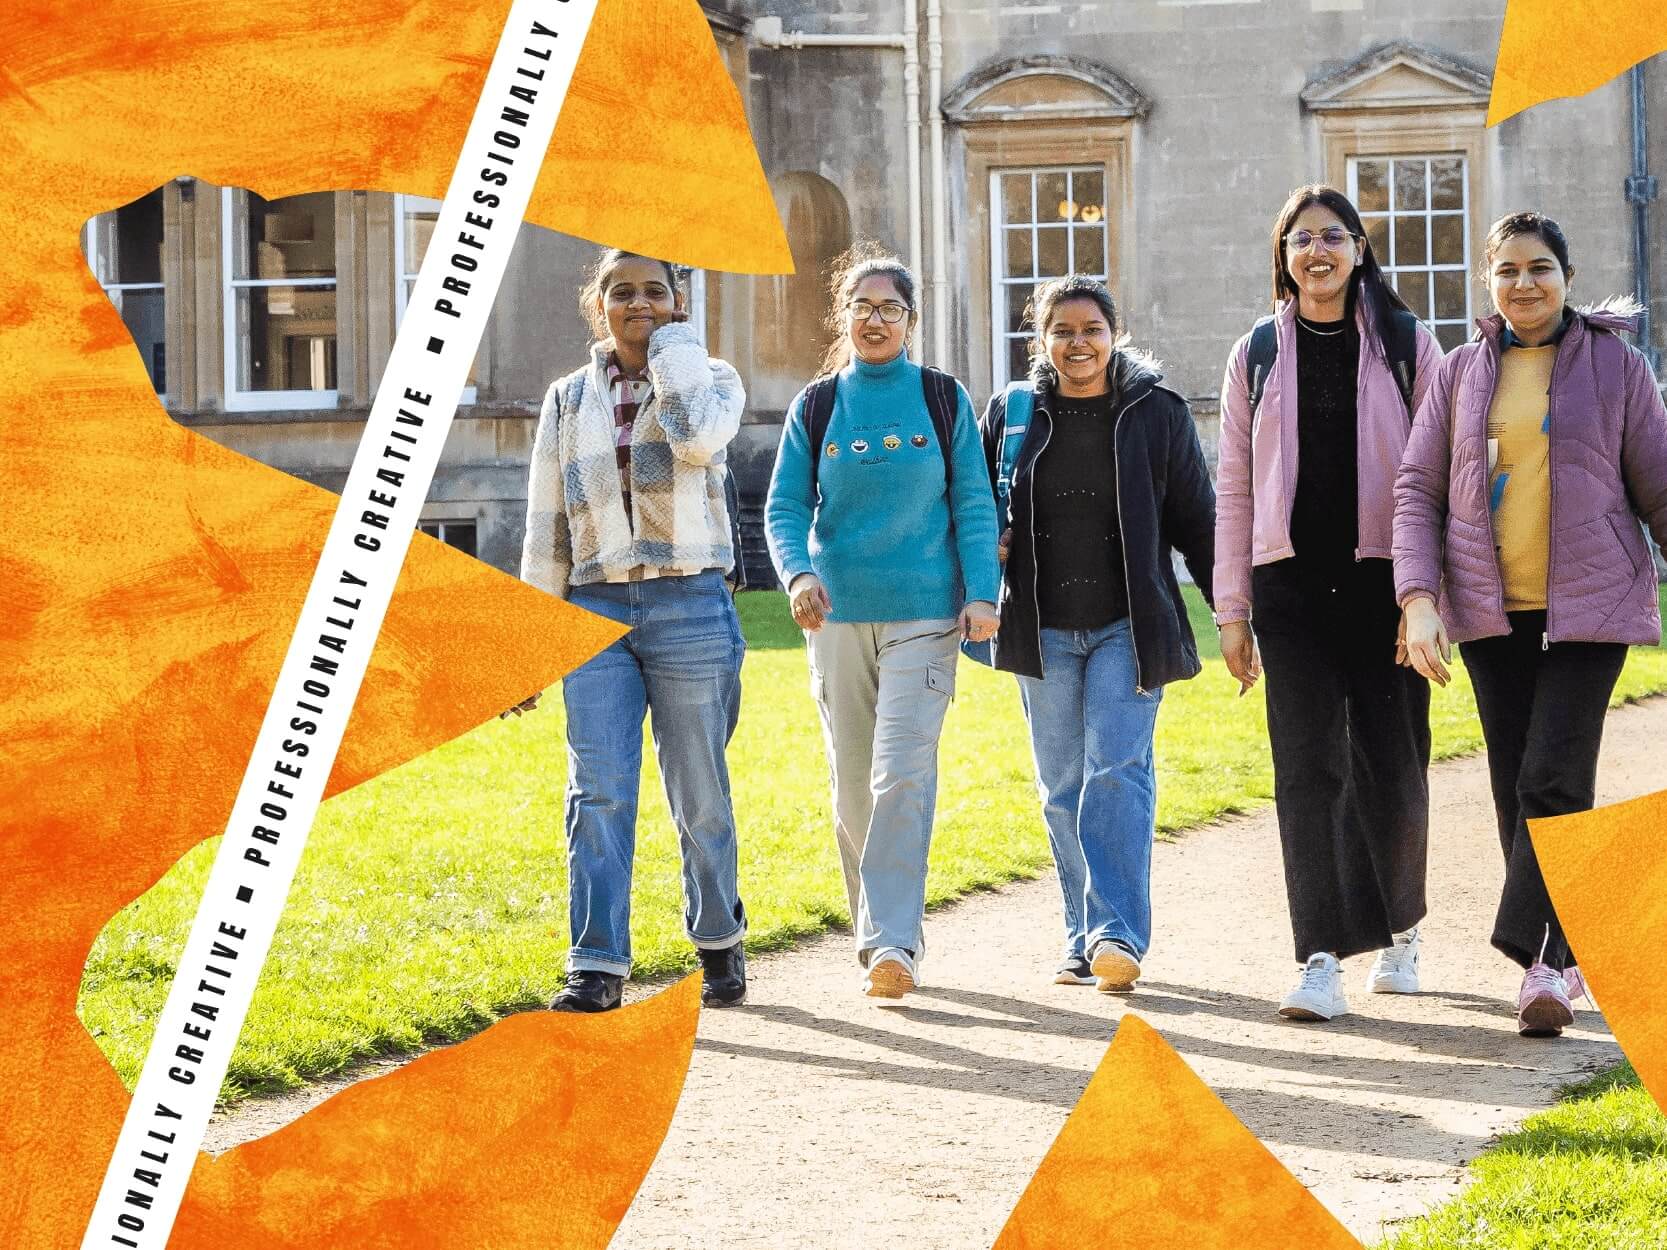 A group of students walking around Bath Spa University campus on a sunny day with a colourful graphic overlay reading "Professionally creative"